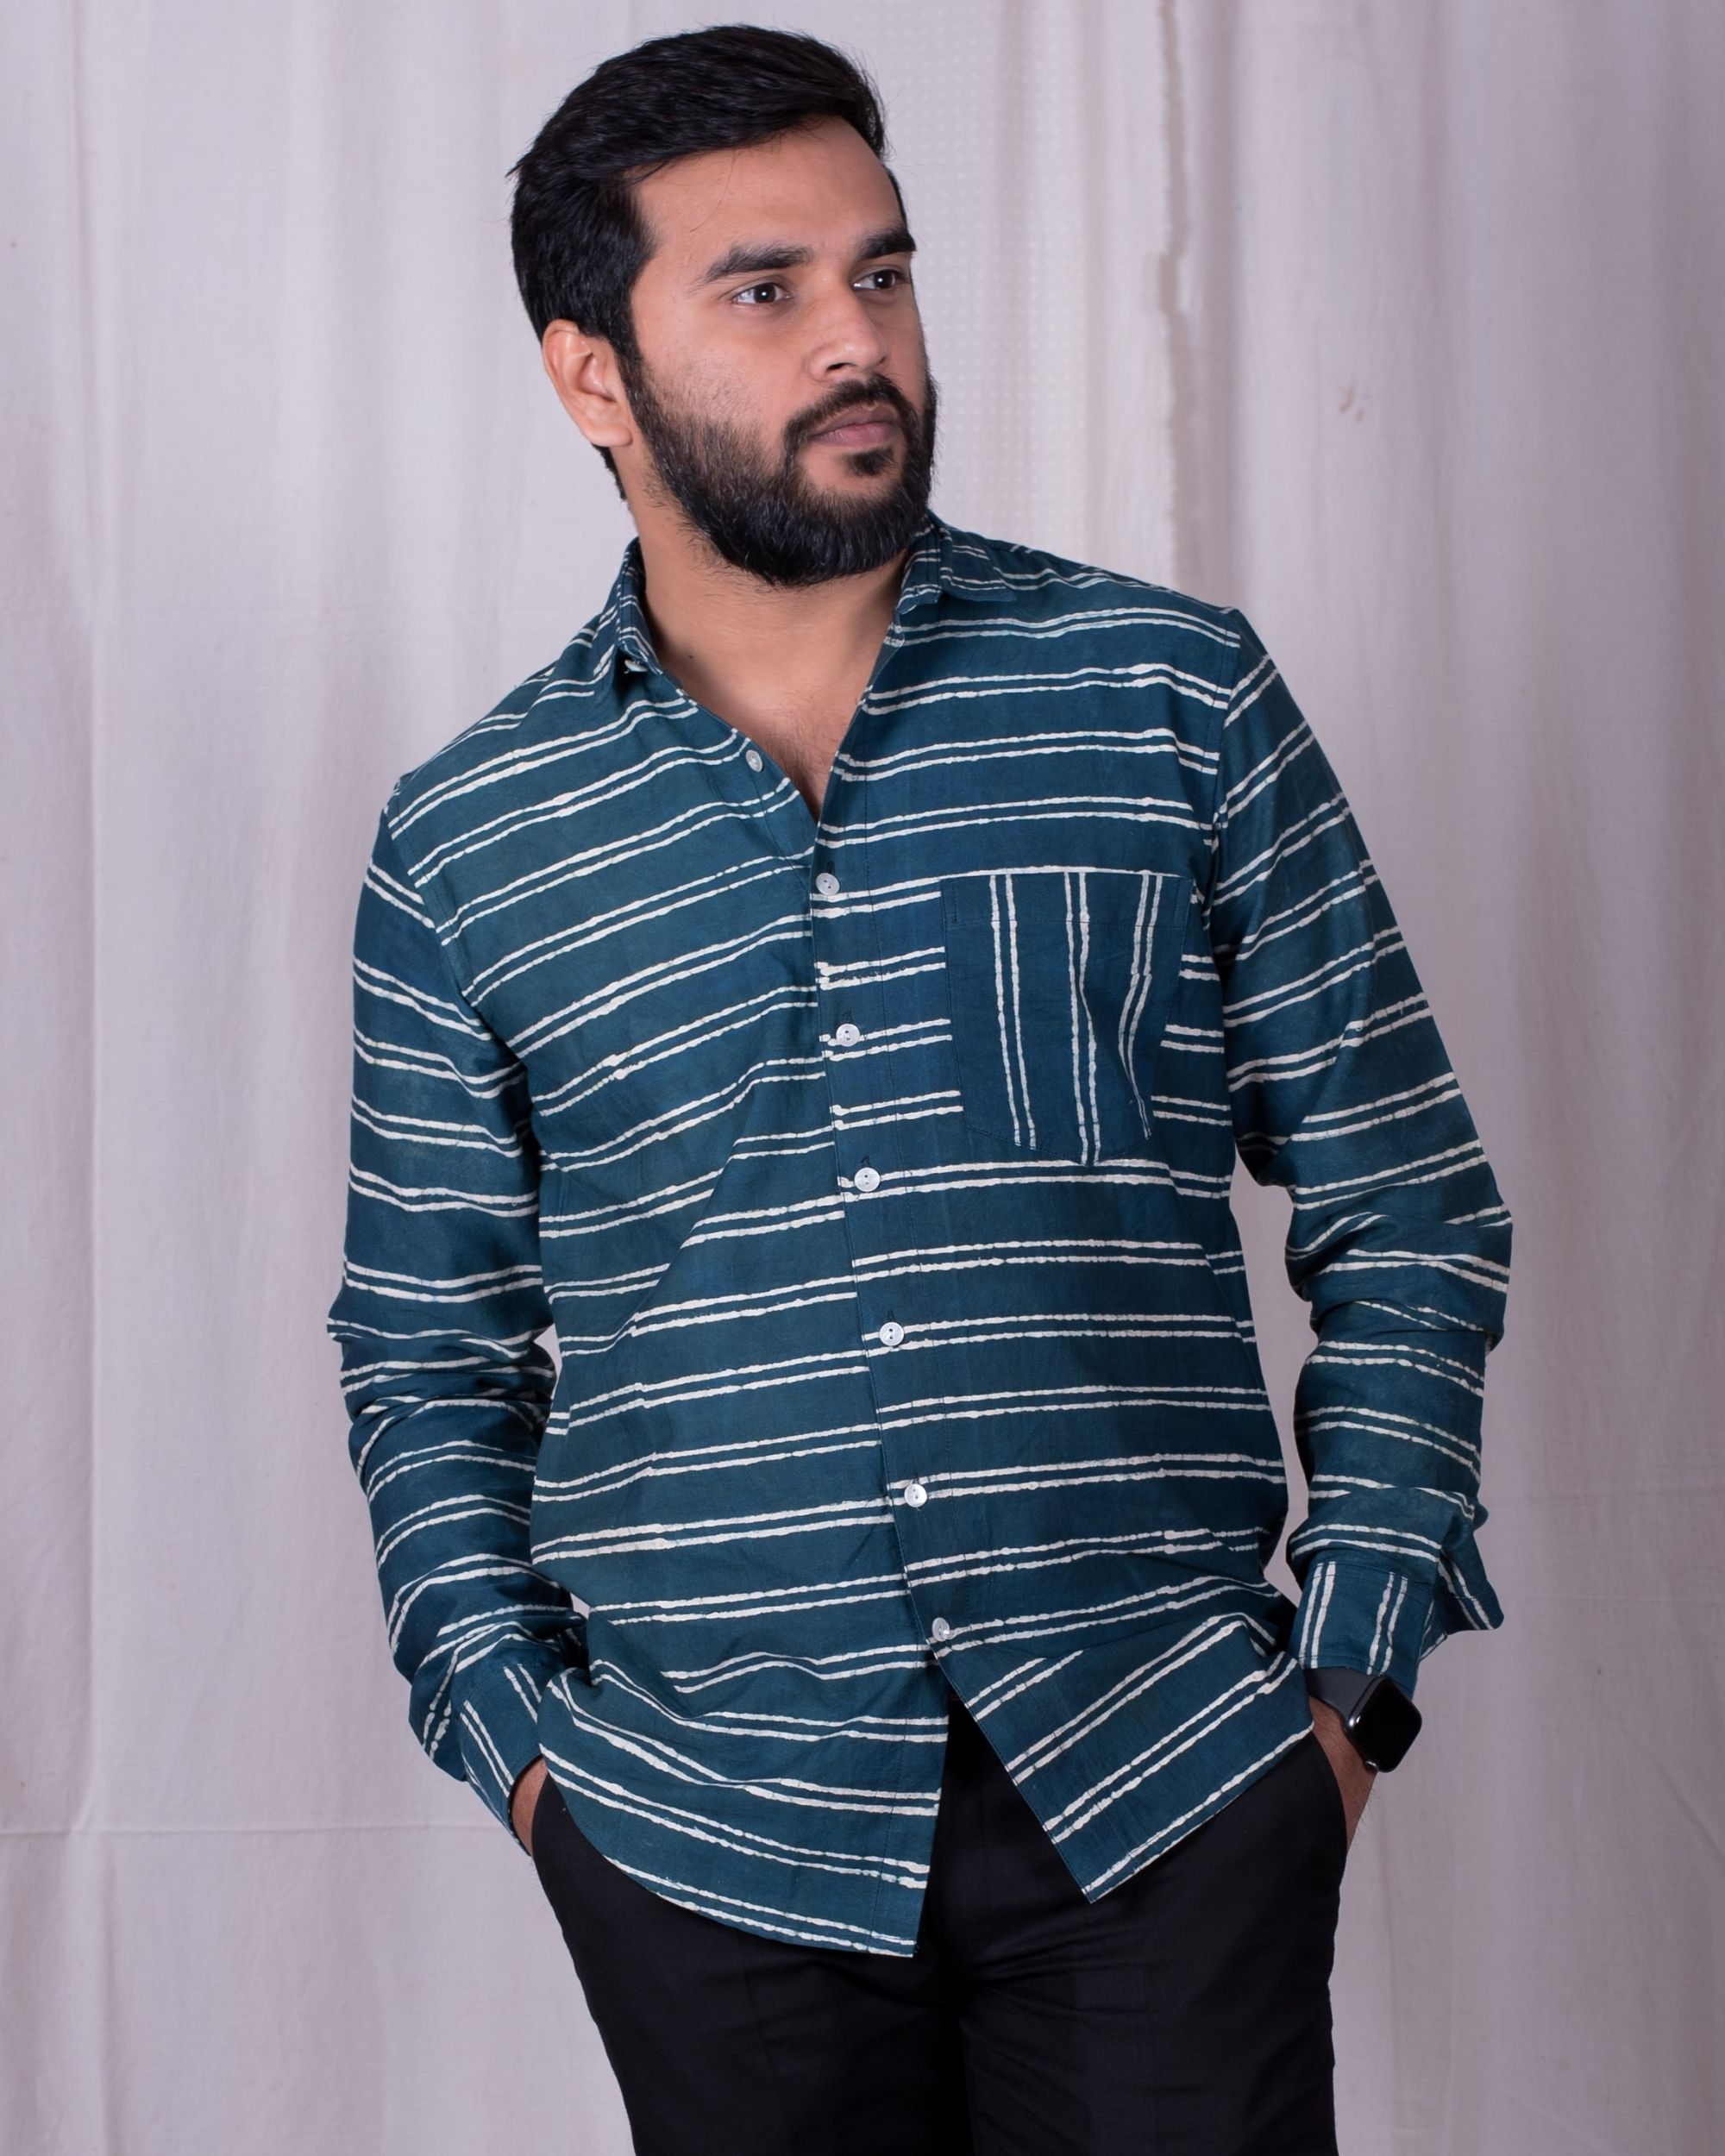 Teal and white striped shirt by Megasa | The Secret Label